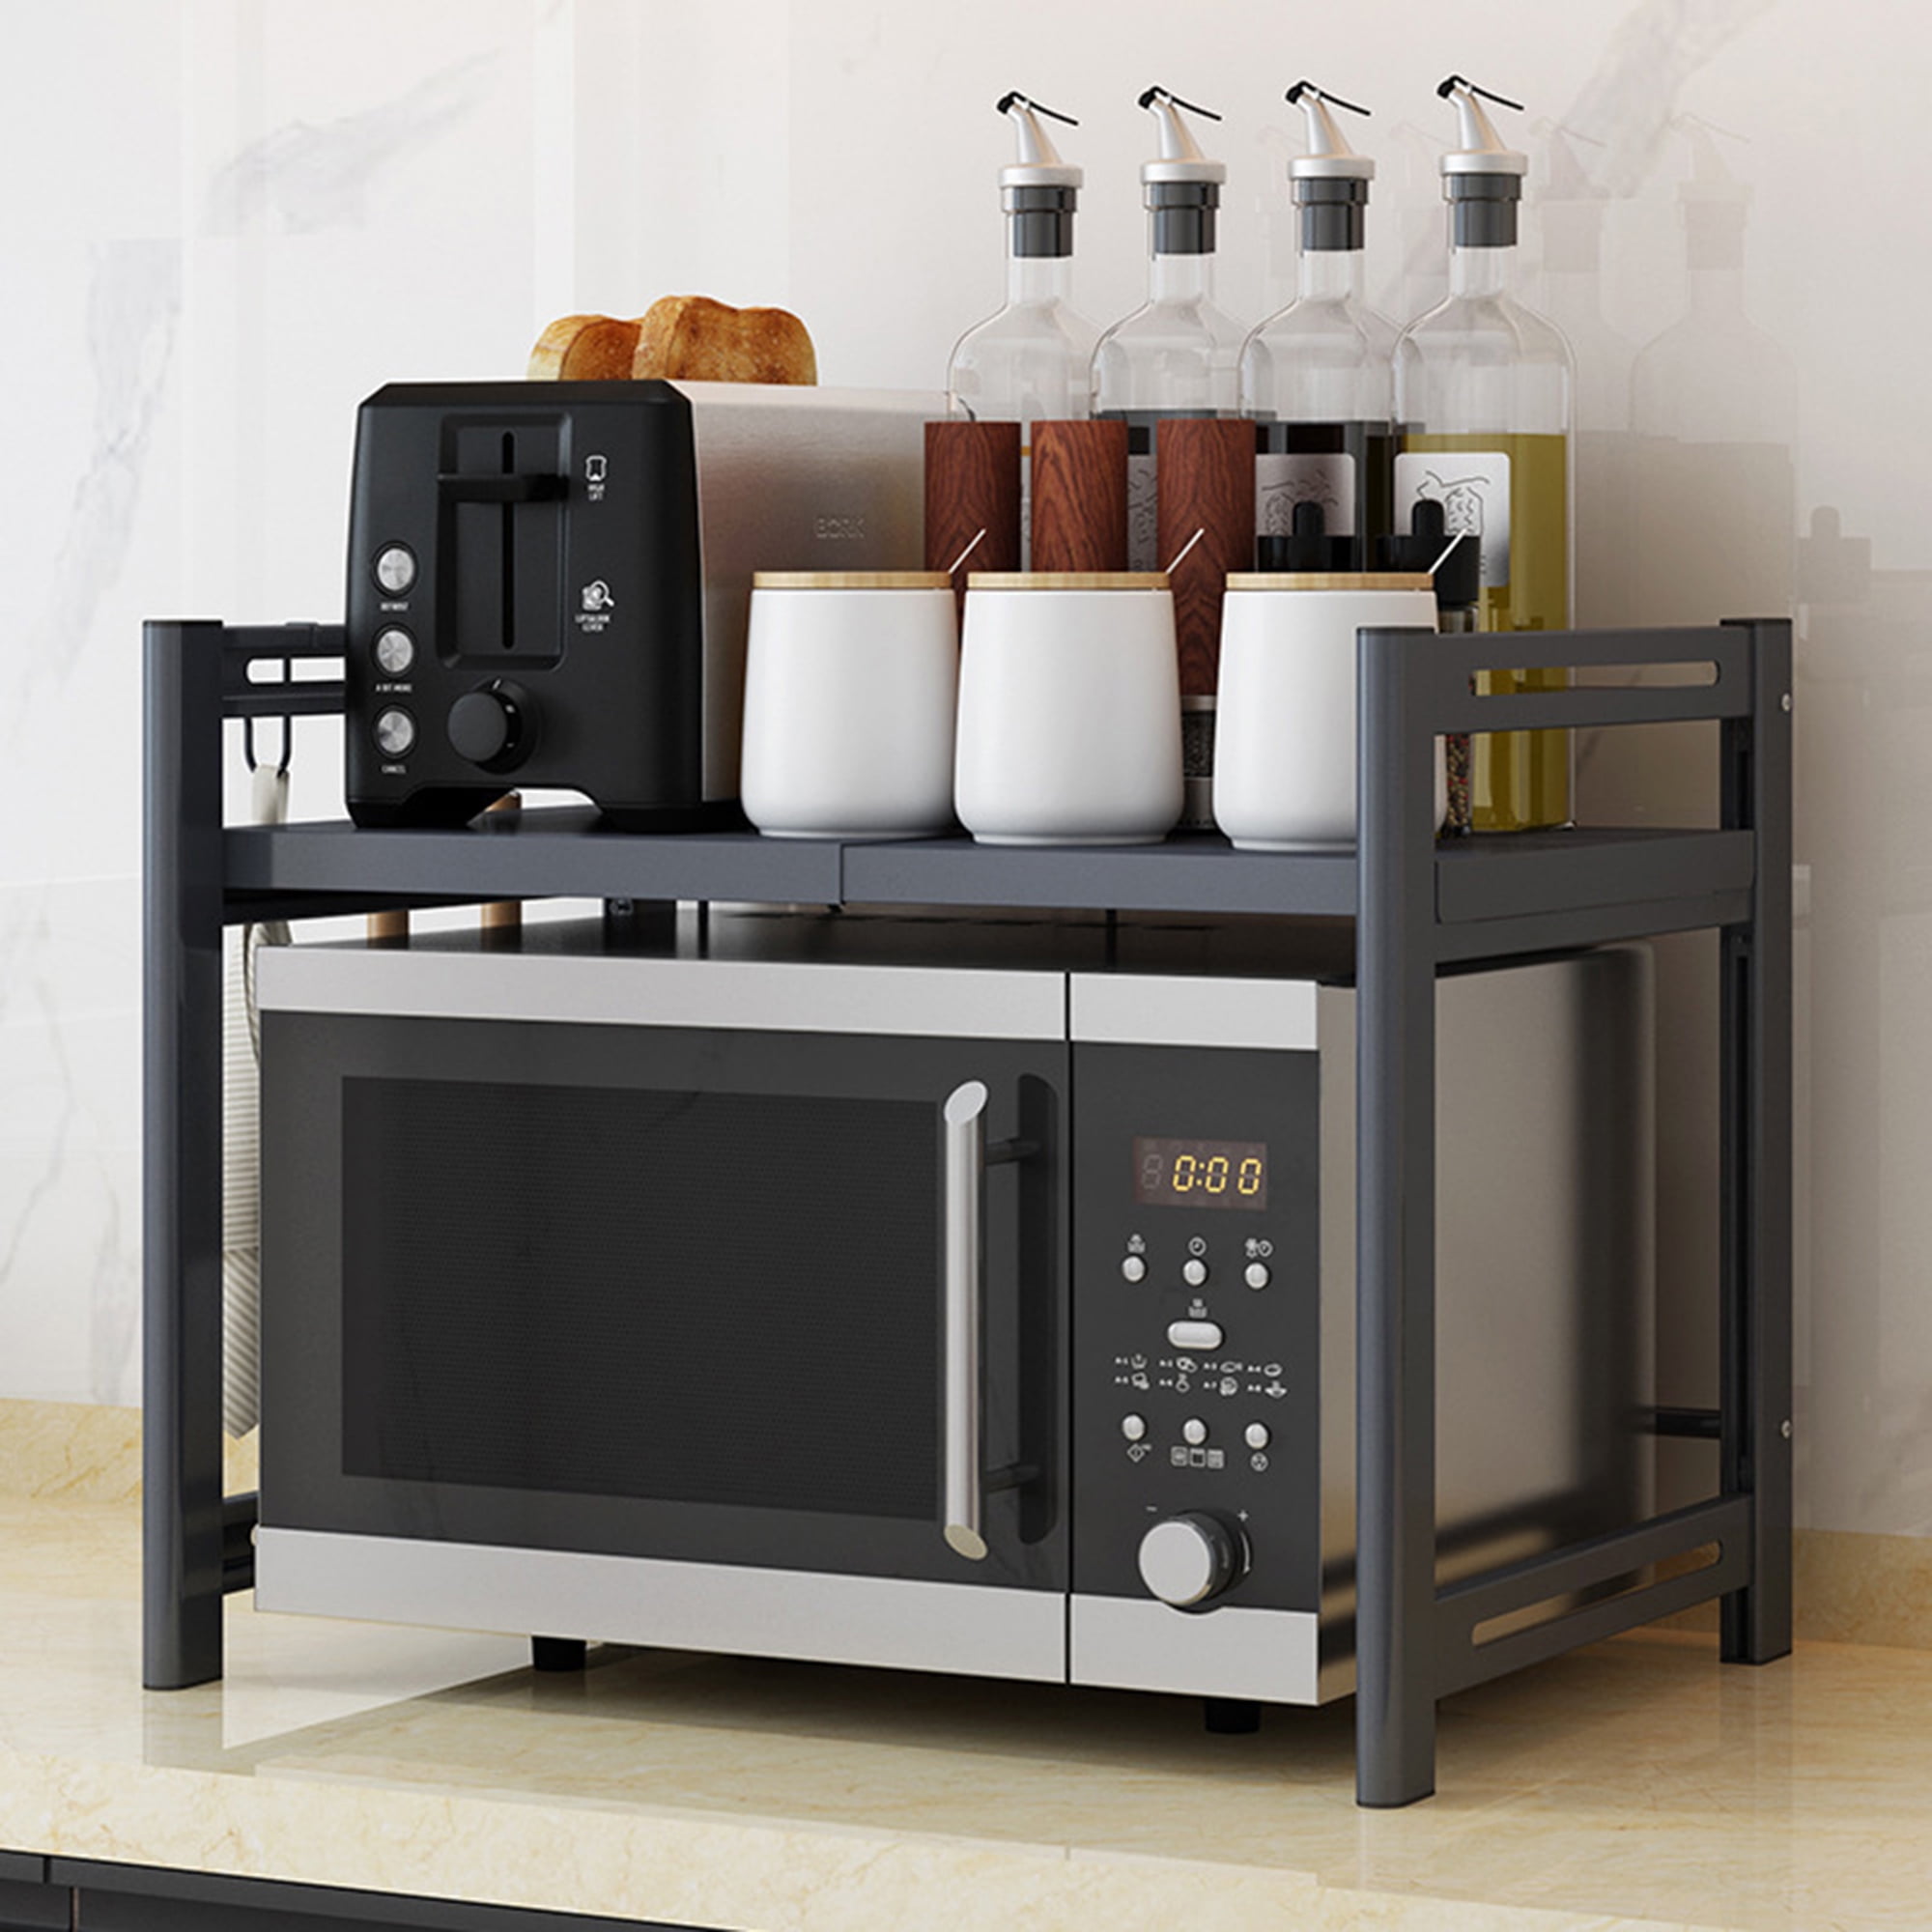 Rackifier Space-Saving Kitchen Rack - MICROVISOR® Extension Hood Solutions  for Microwave OTR